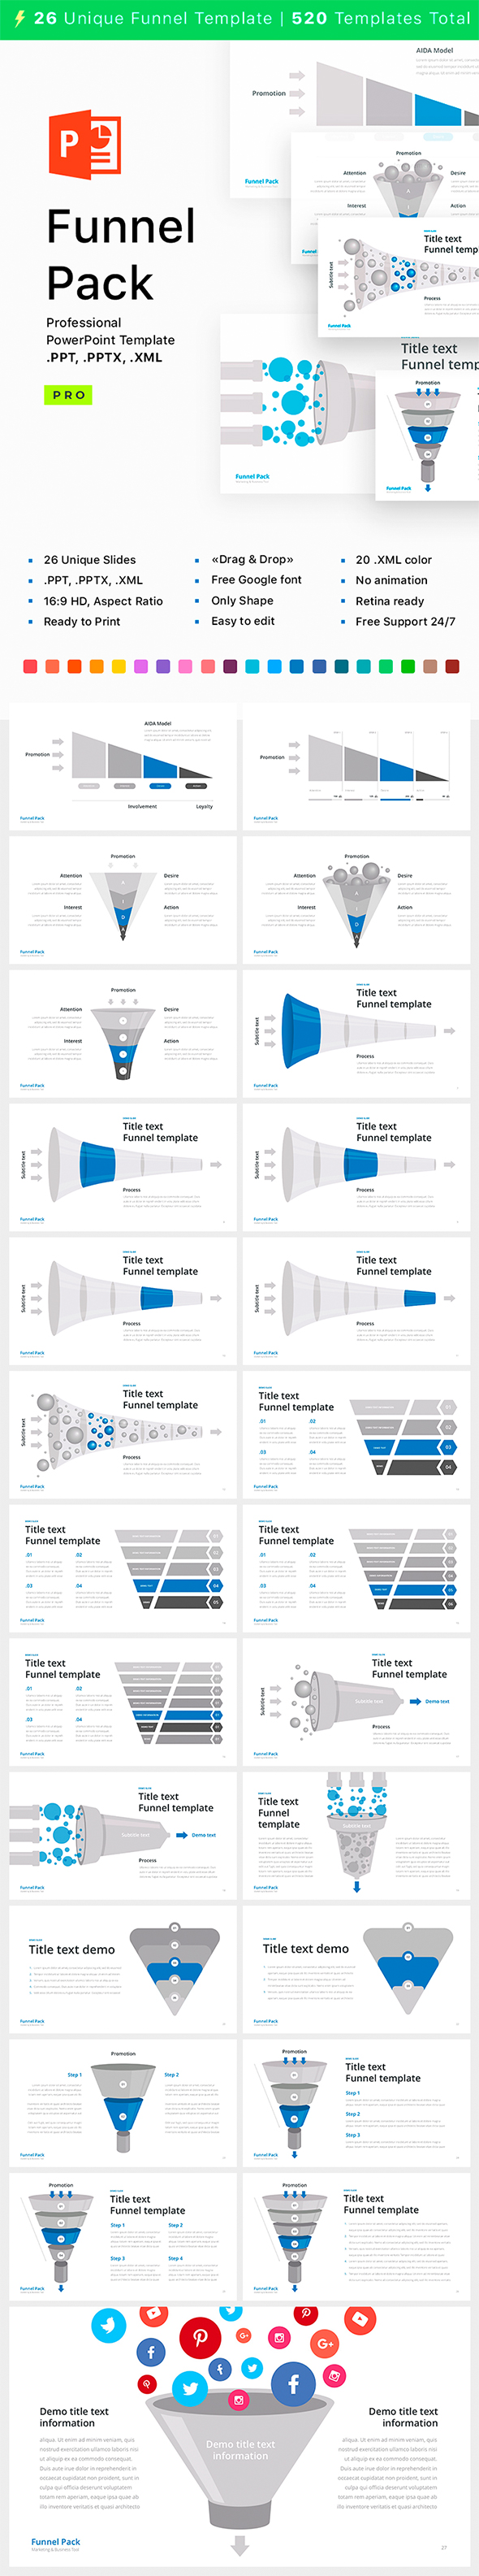 Funnel Pack for PowerPoint